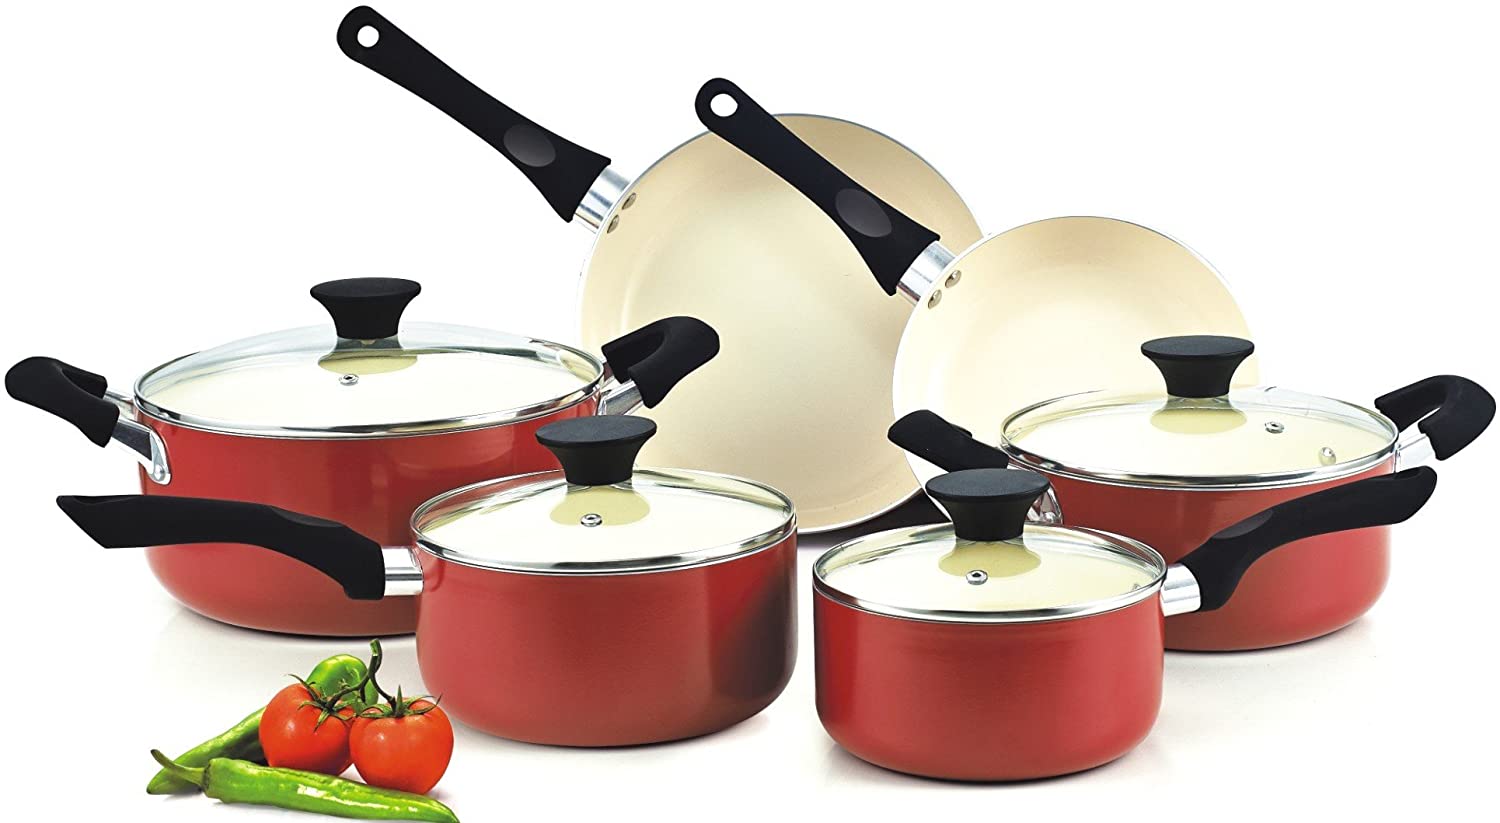 Cook N Home Pots and Pans Nonstick Cooking Set includes Saucepan